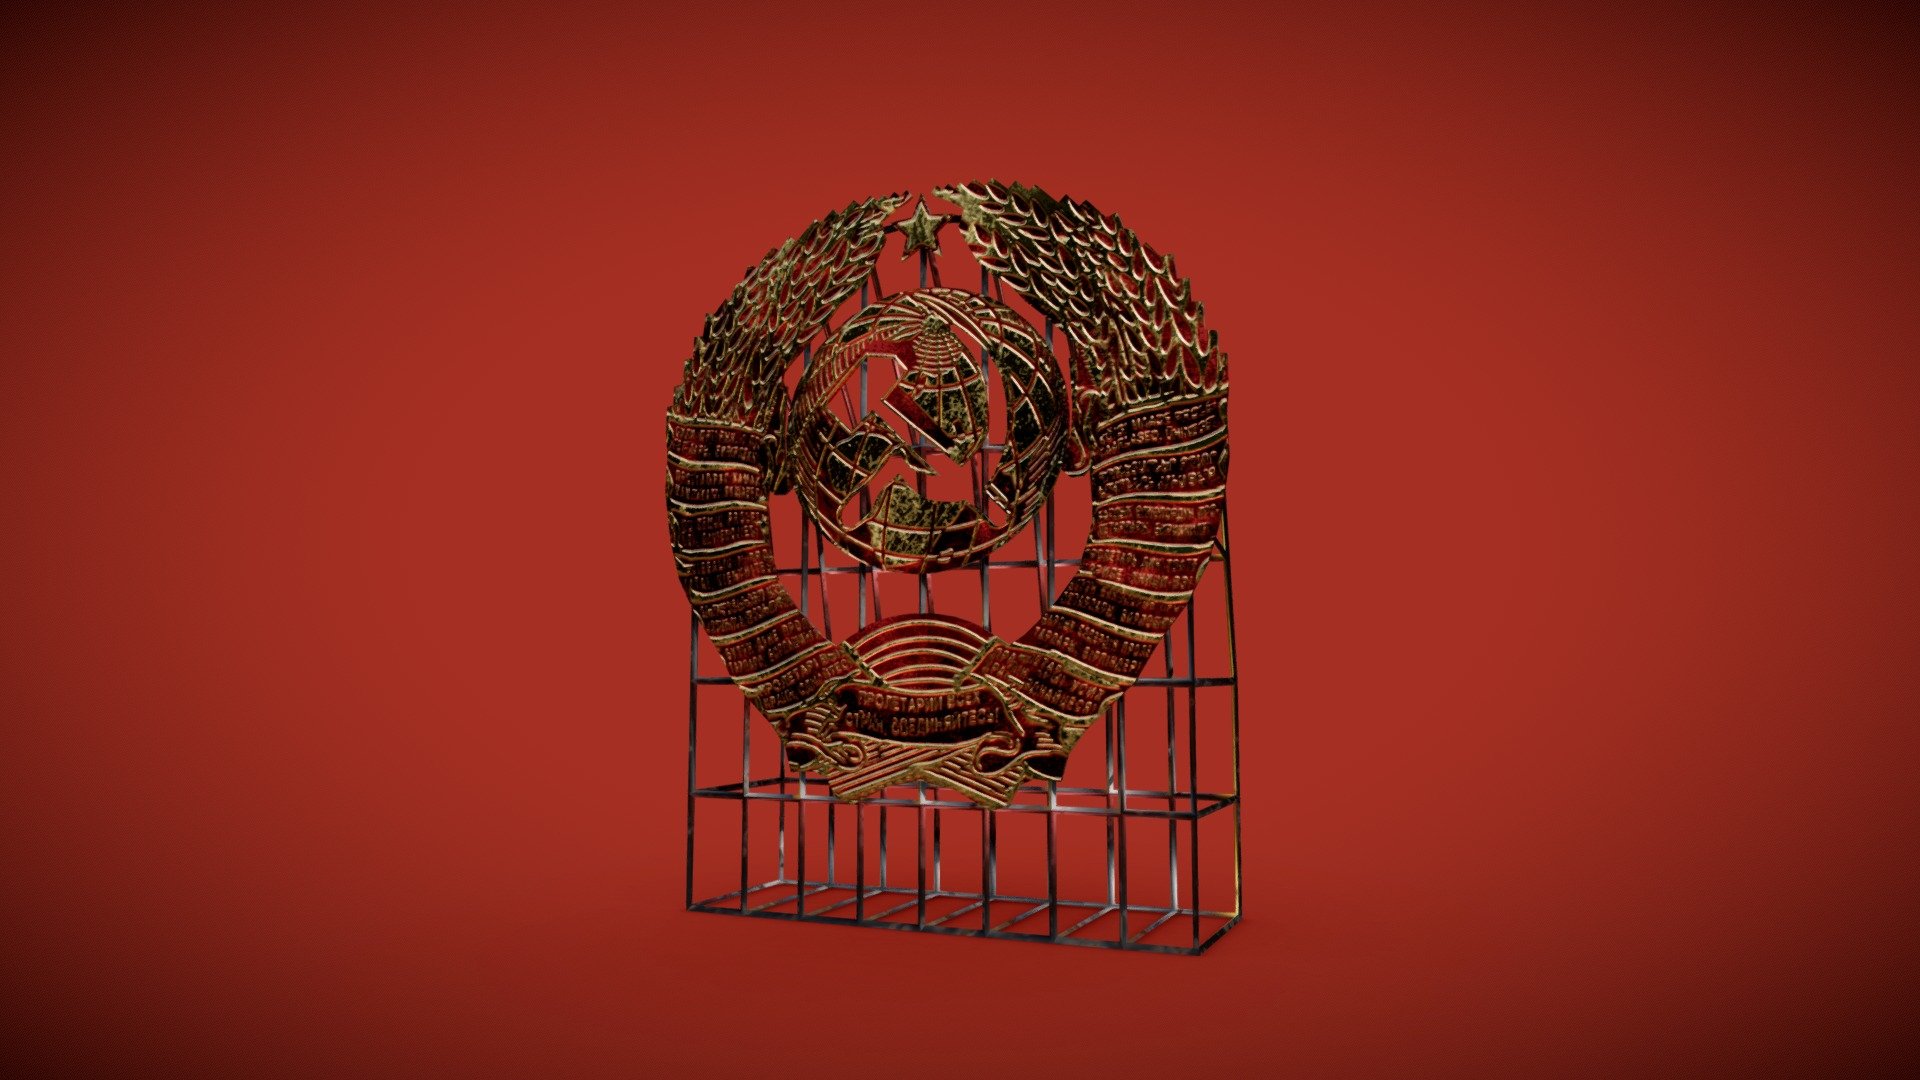 The USSR State Emblem as a sign. Created as a background piece to sit on the top of a Khrushchyovka building 3d model